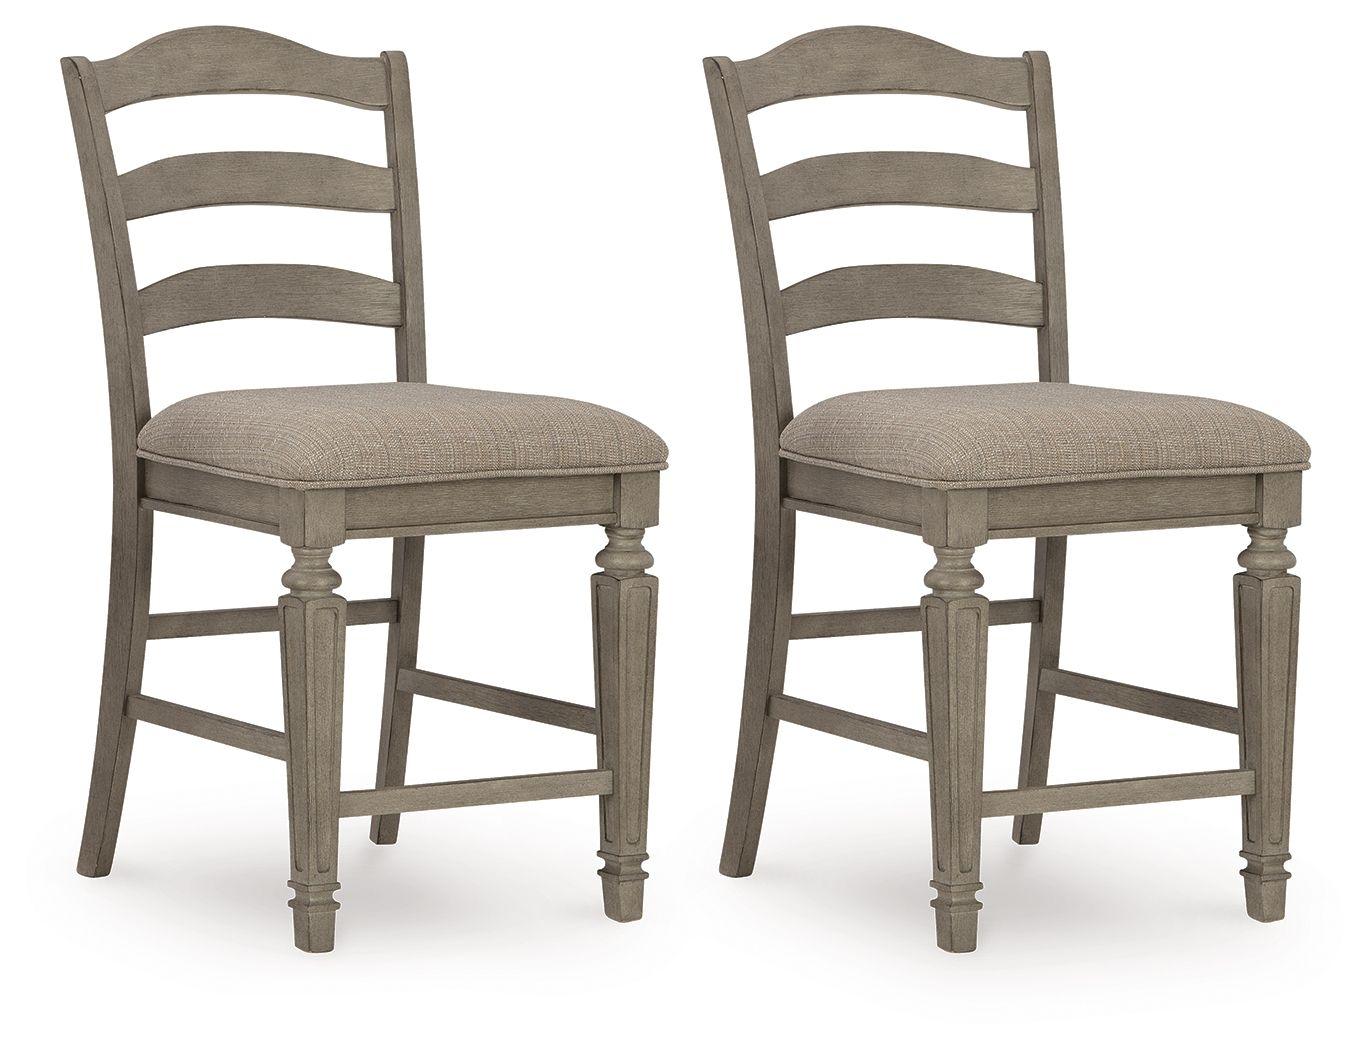 Signature Design by Ashley® - Lodenbay - Antique Gray - Upholstered Barstool (Set of 2) - 5th Avenue Furniture